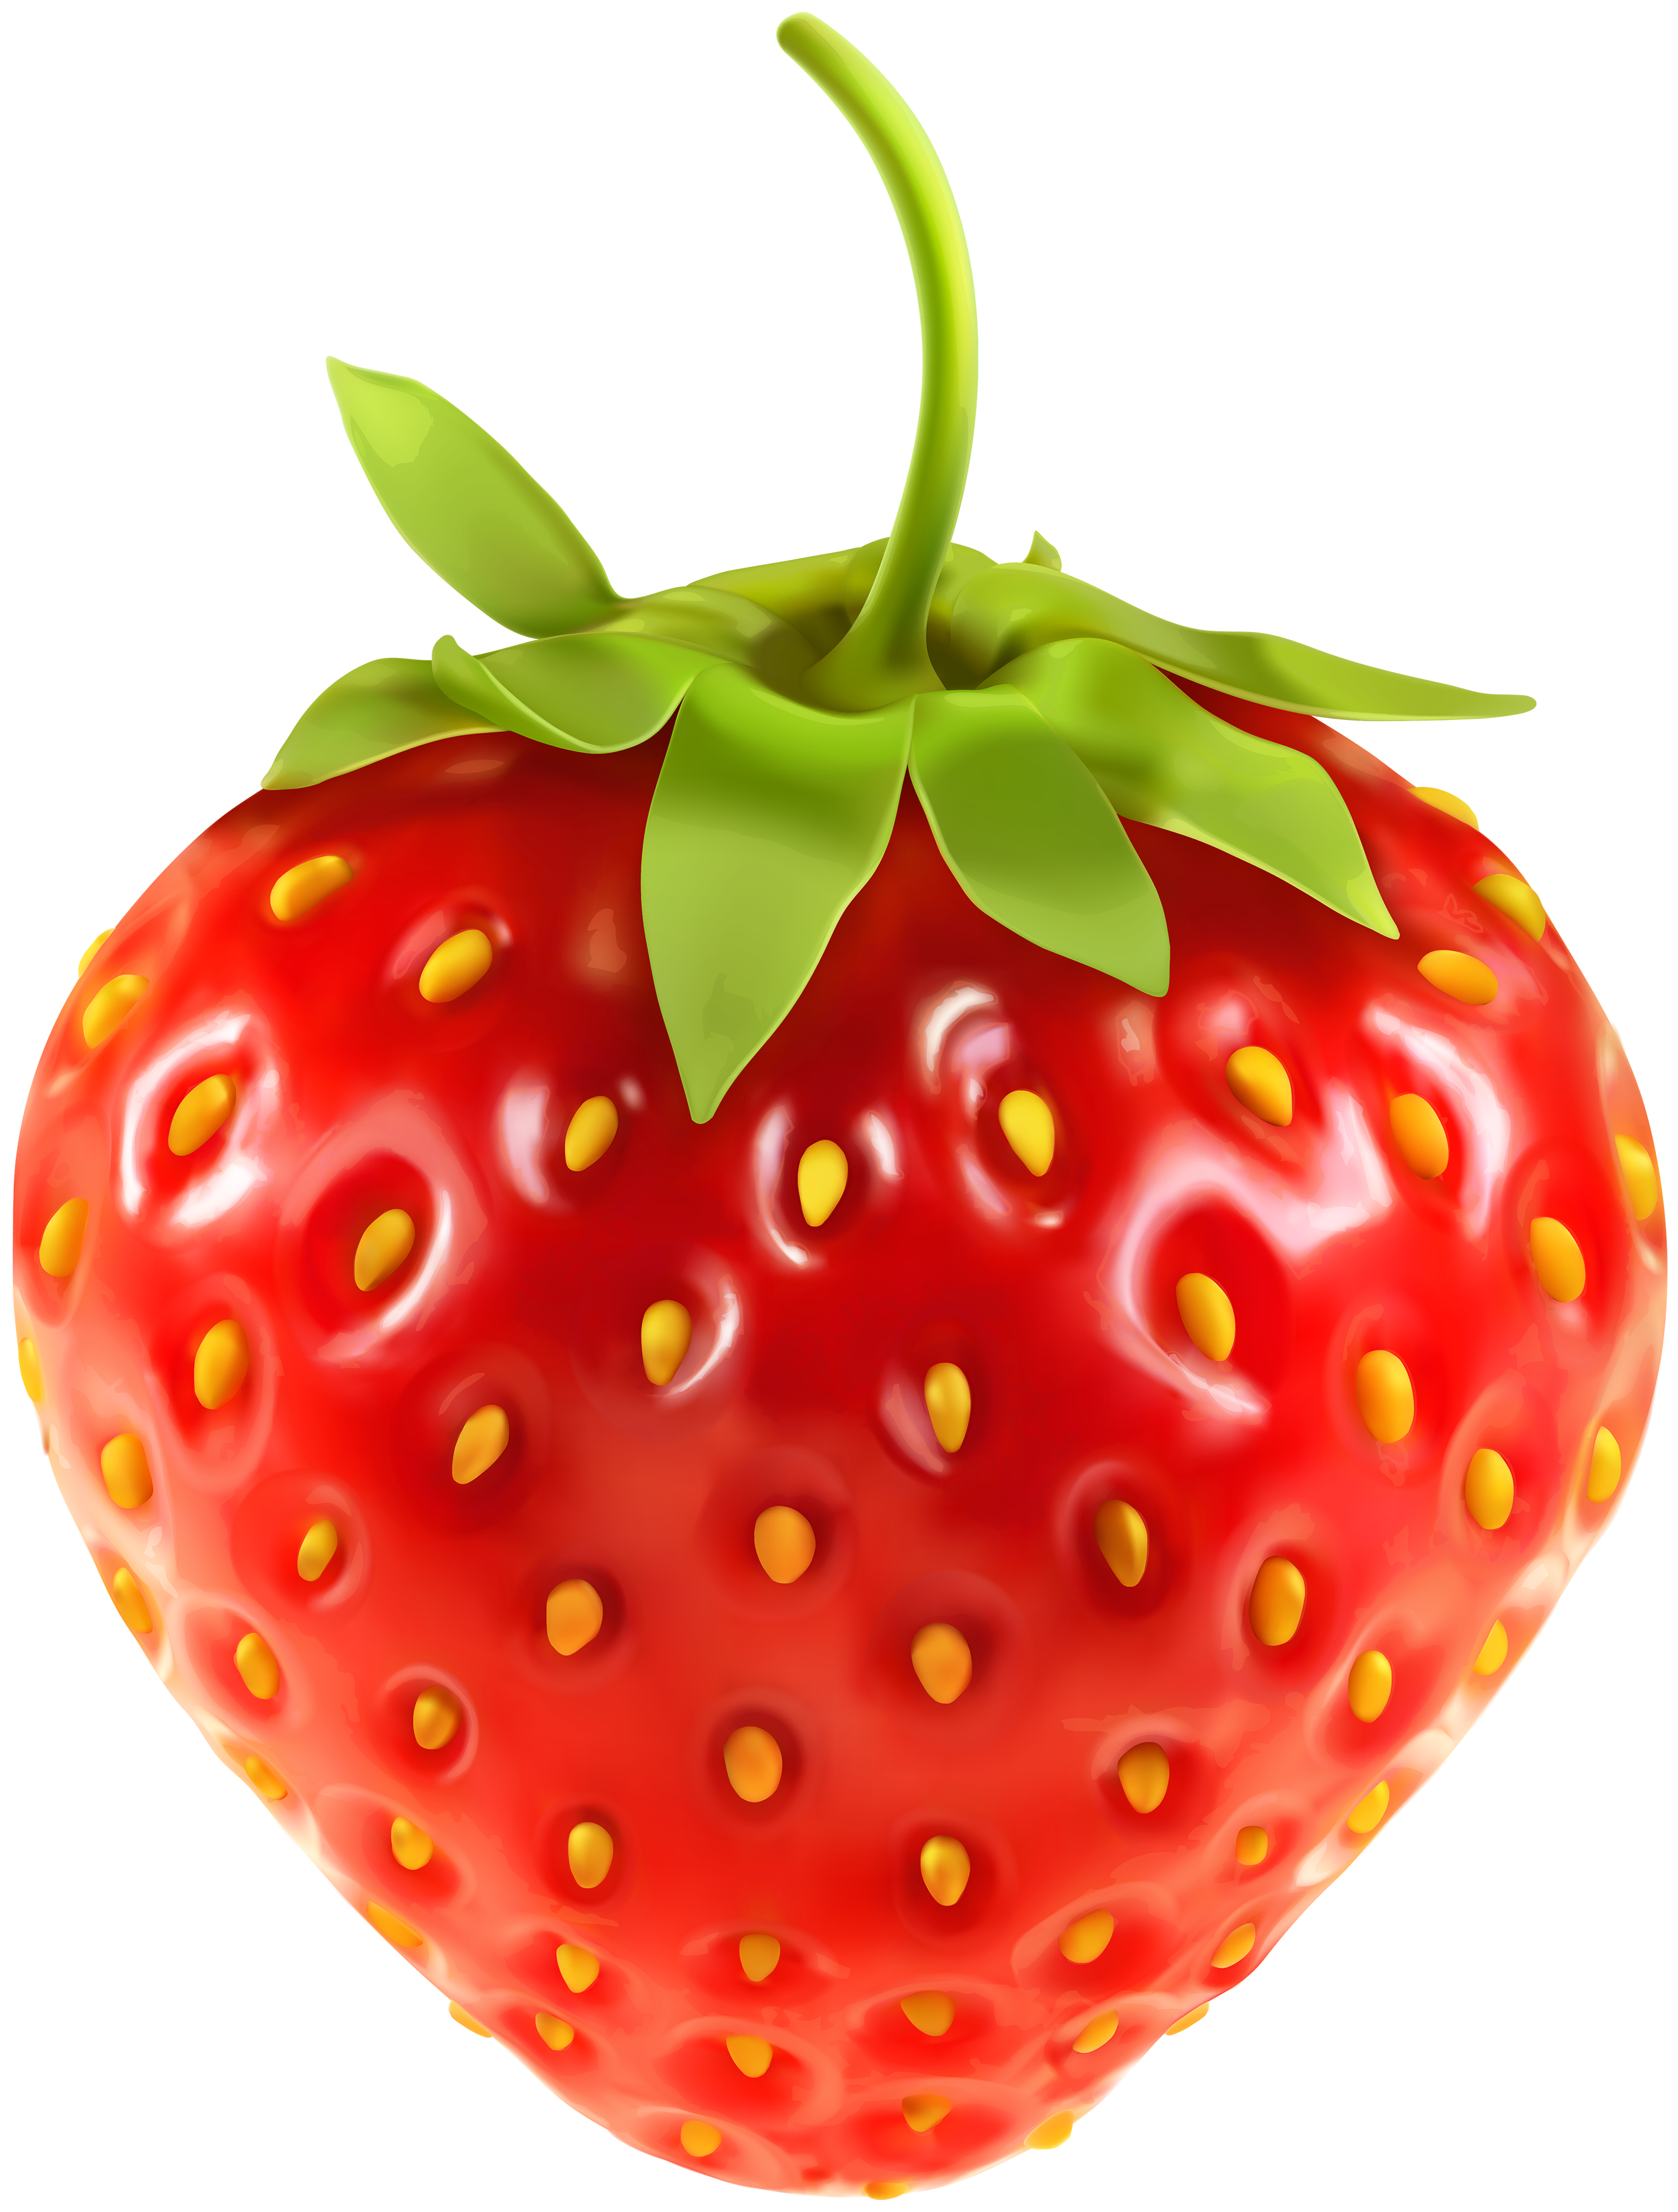 clipart of a strawberry - photo #31